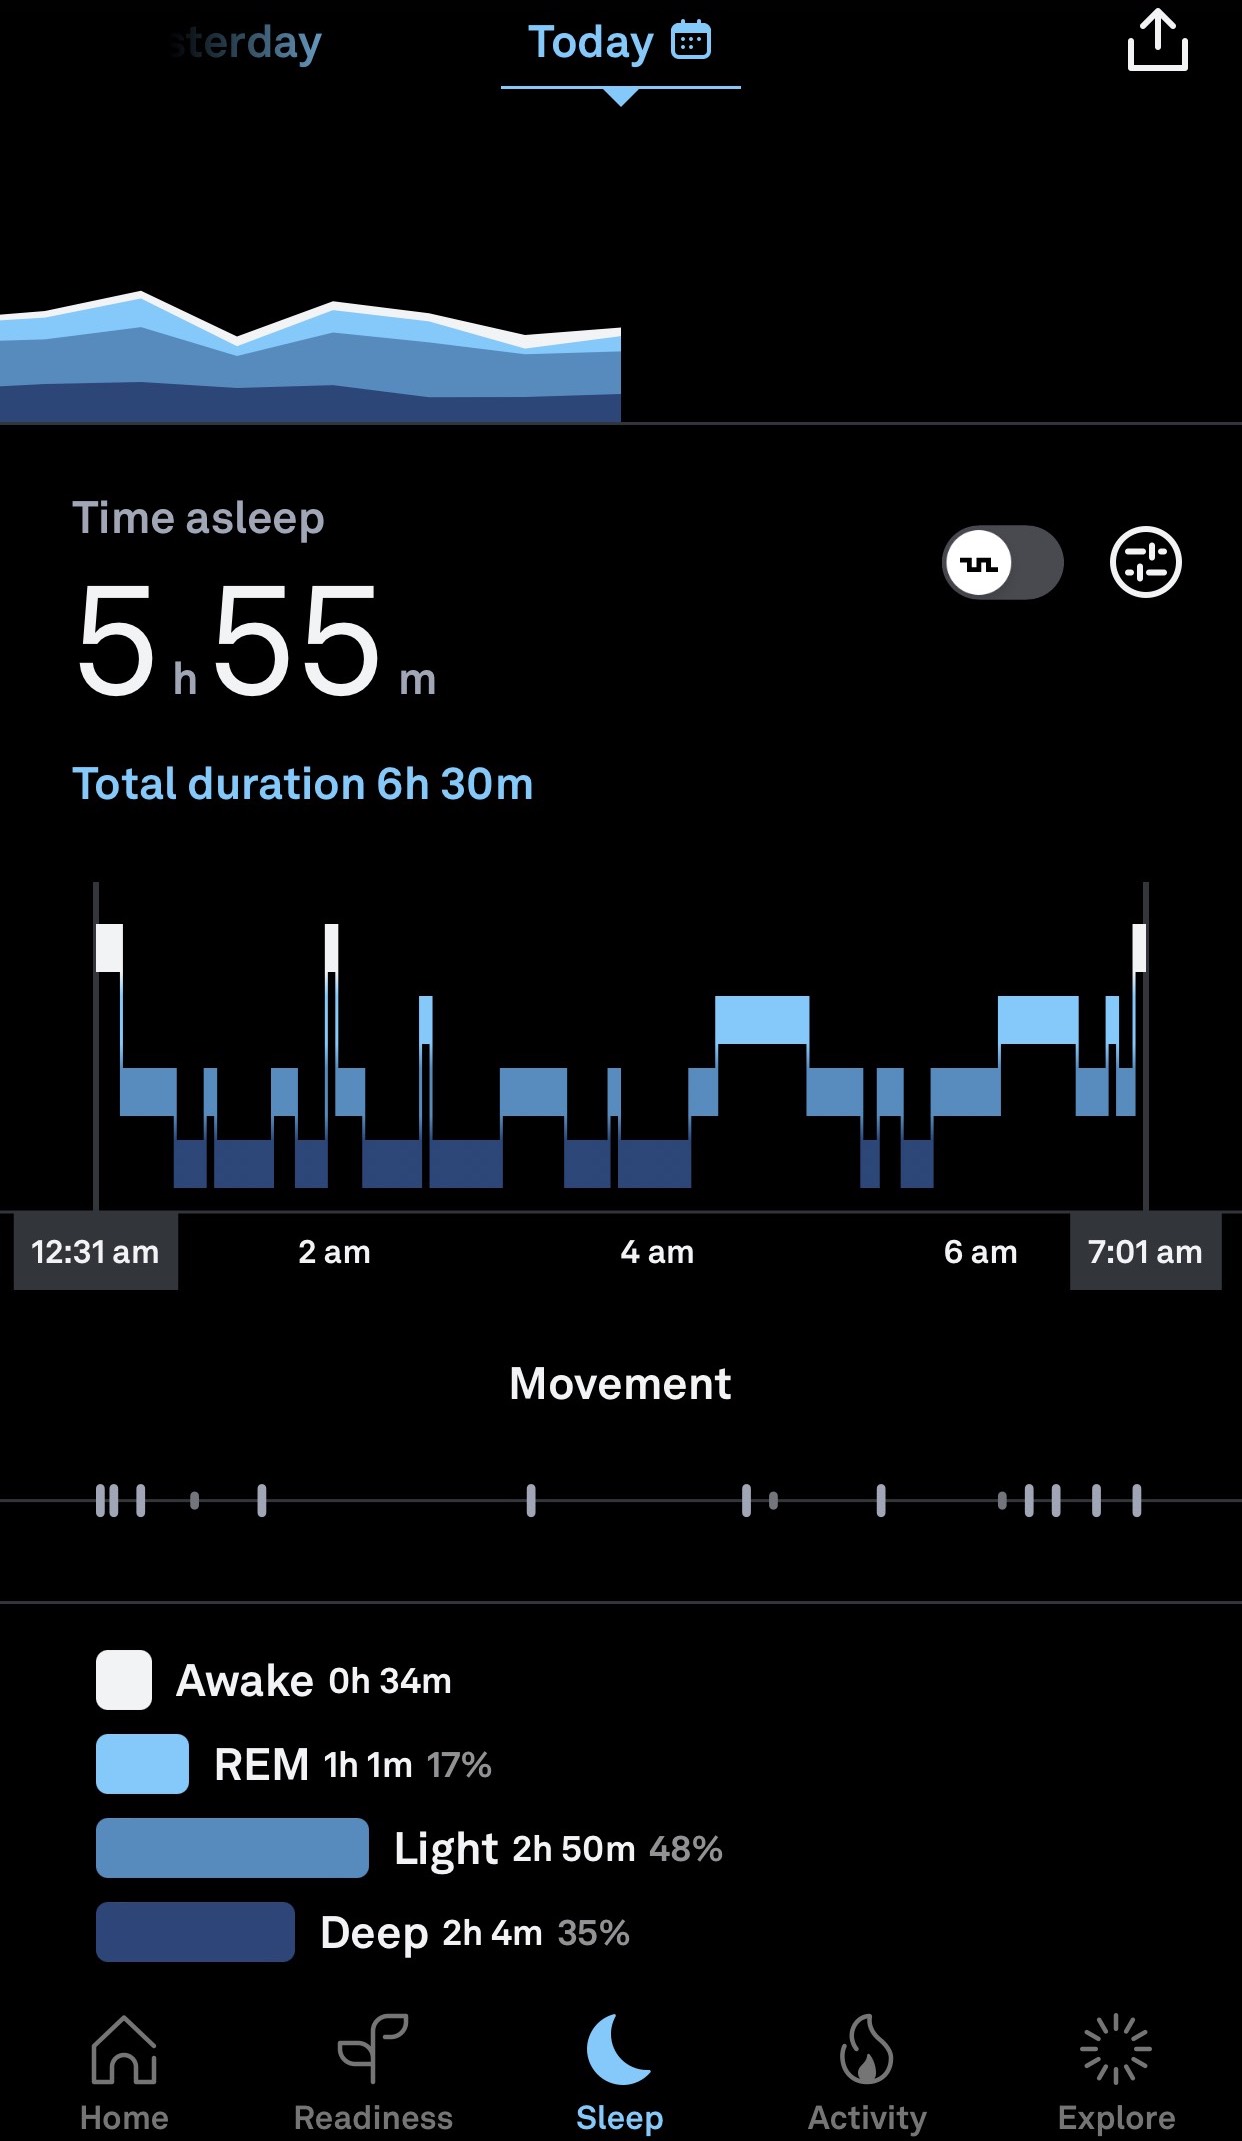 the sleep tab of the Oura App displaying a hypnogram (sleep stage graph). REM, light sleep, and deep sleep are shown in shades of blue. Awake time is shown in white